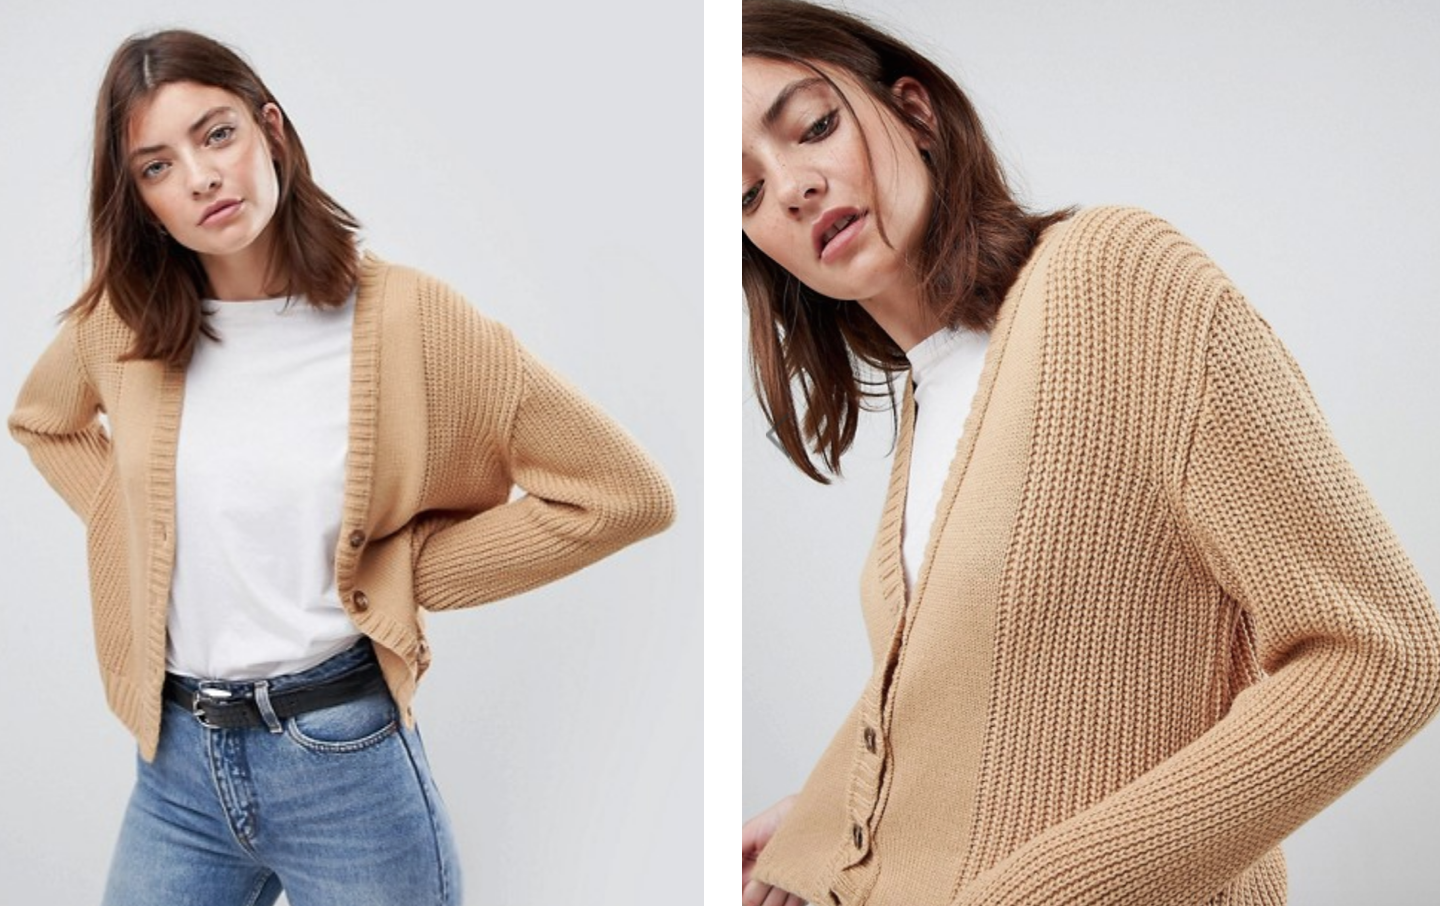 Model wearing cream colored cardigan from ASOS